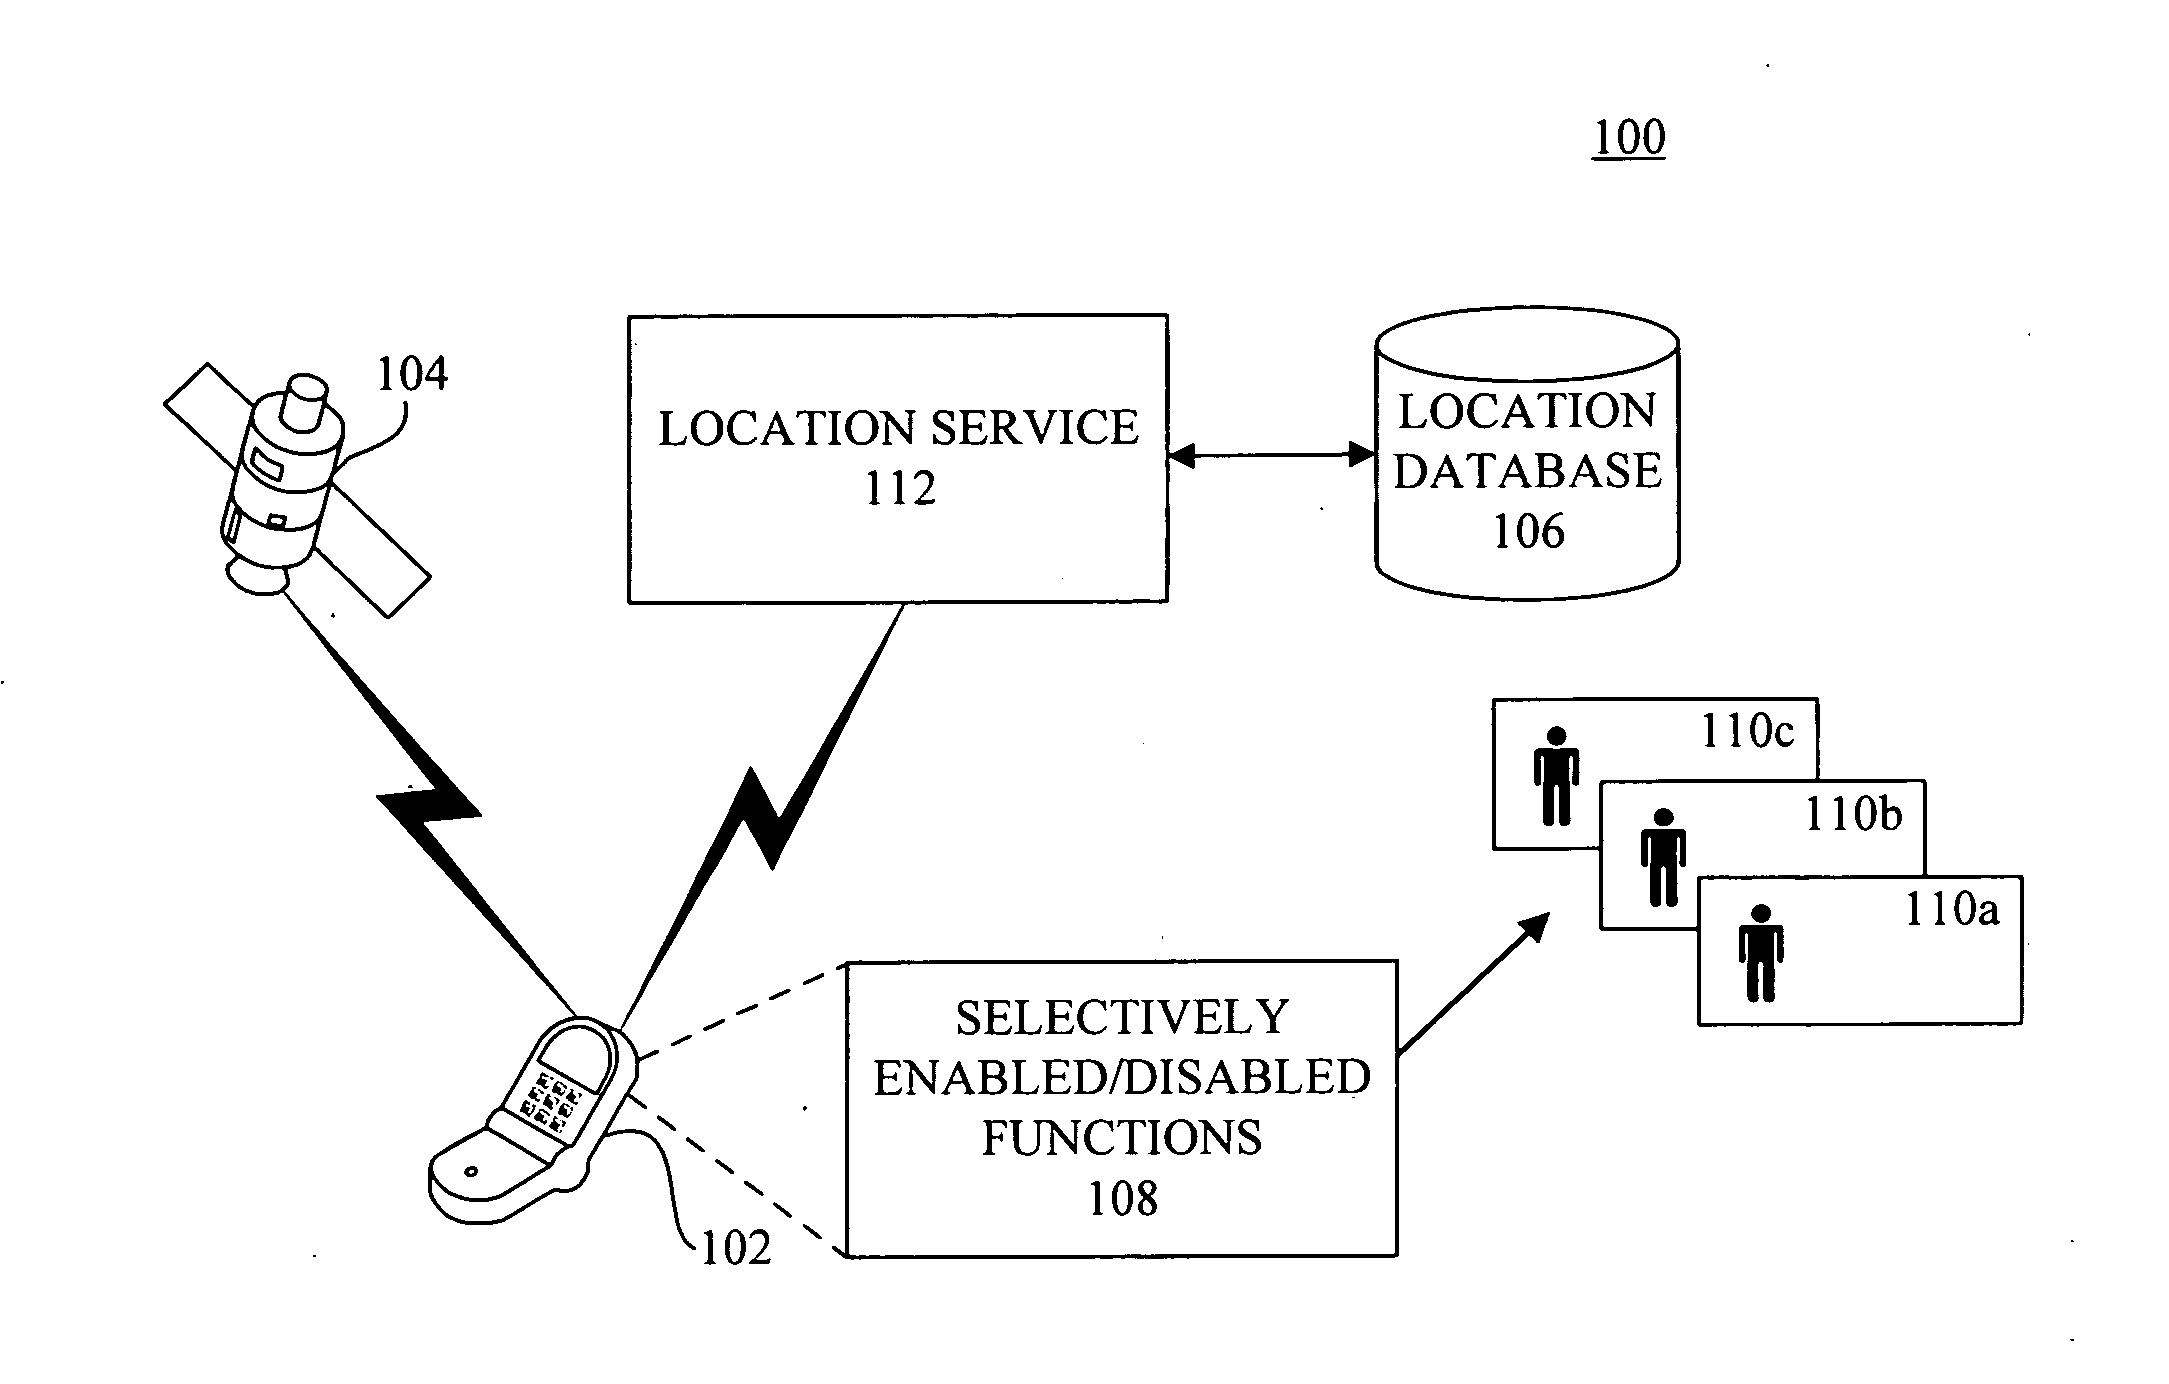 Selective enablement and disablement of a mobile communications device based upon location